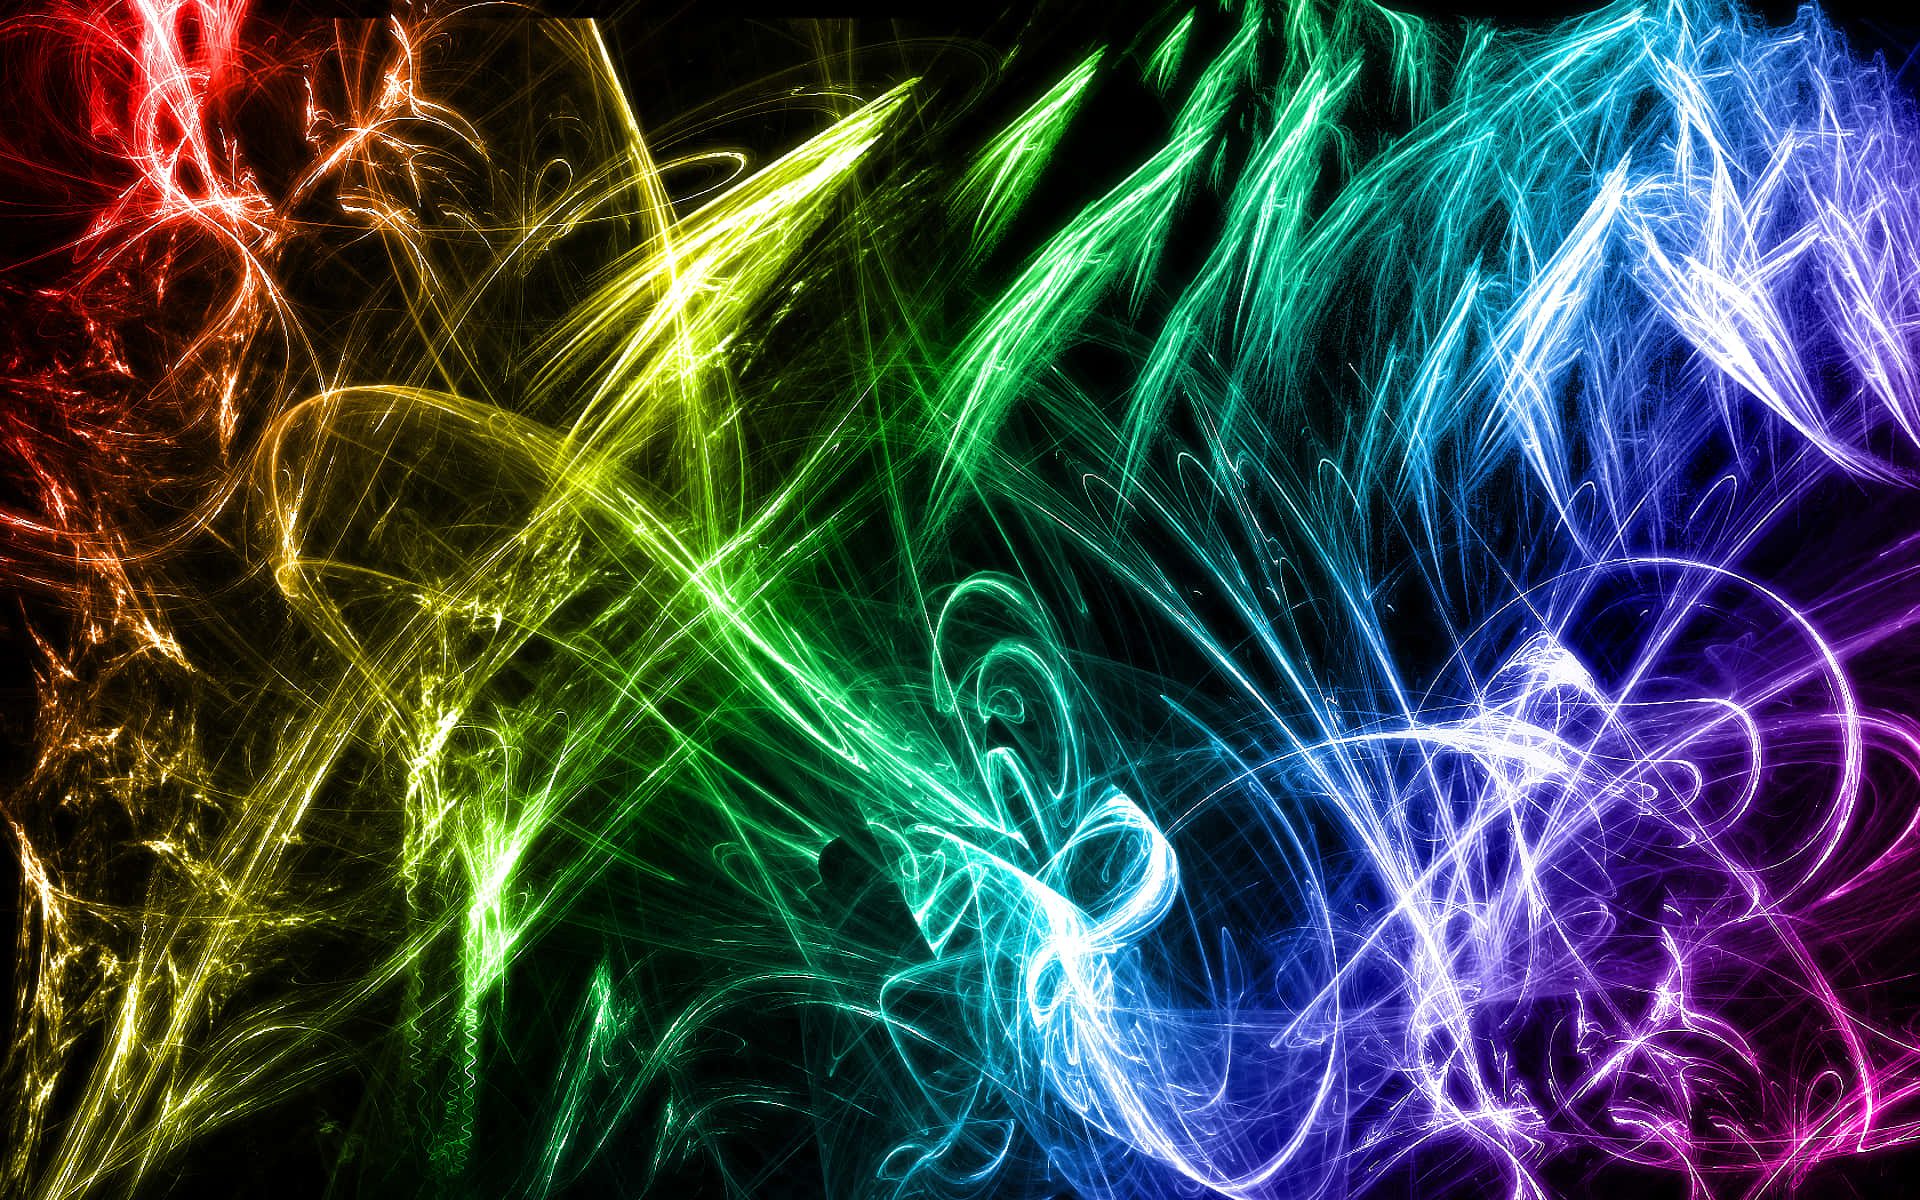 Dark Cool Abstract Art With Neon Tones Background